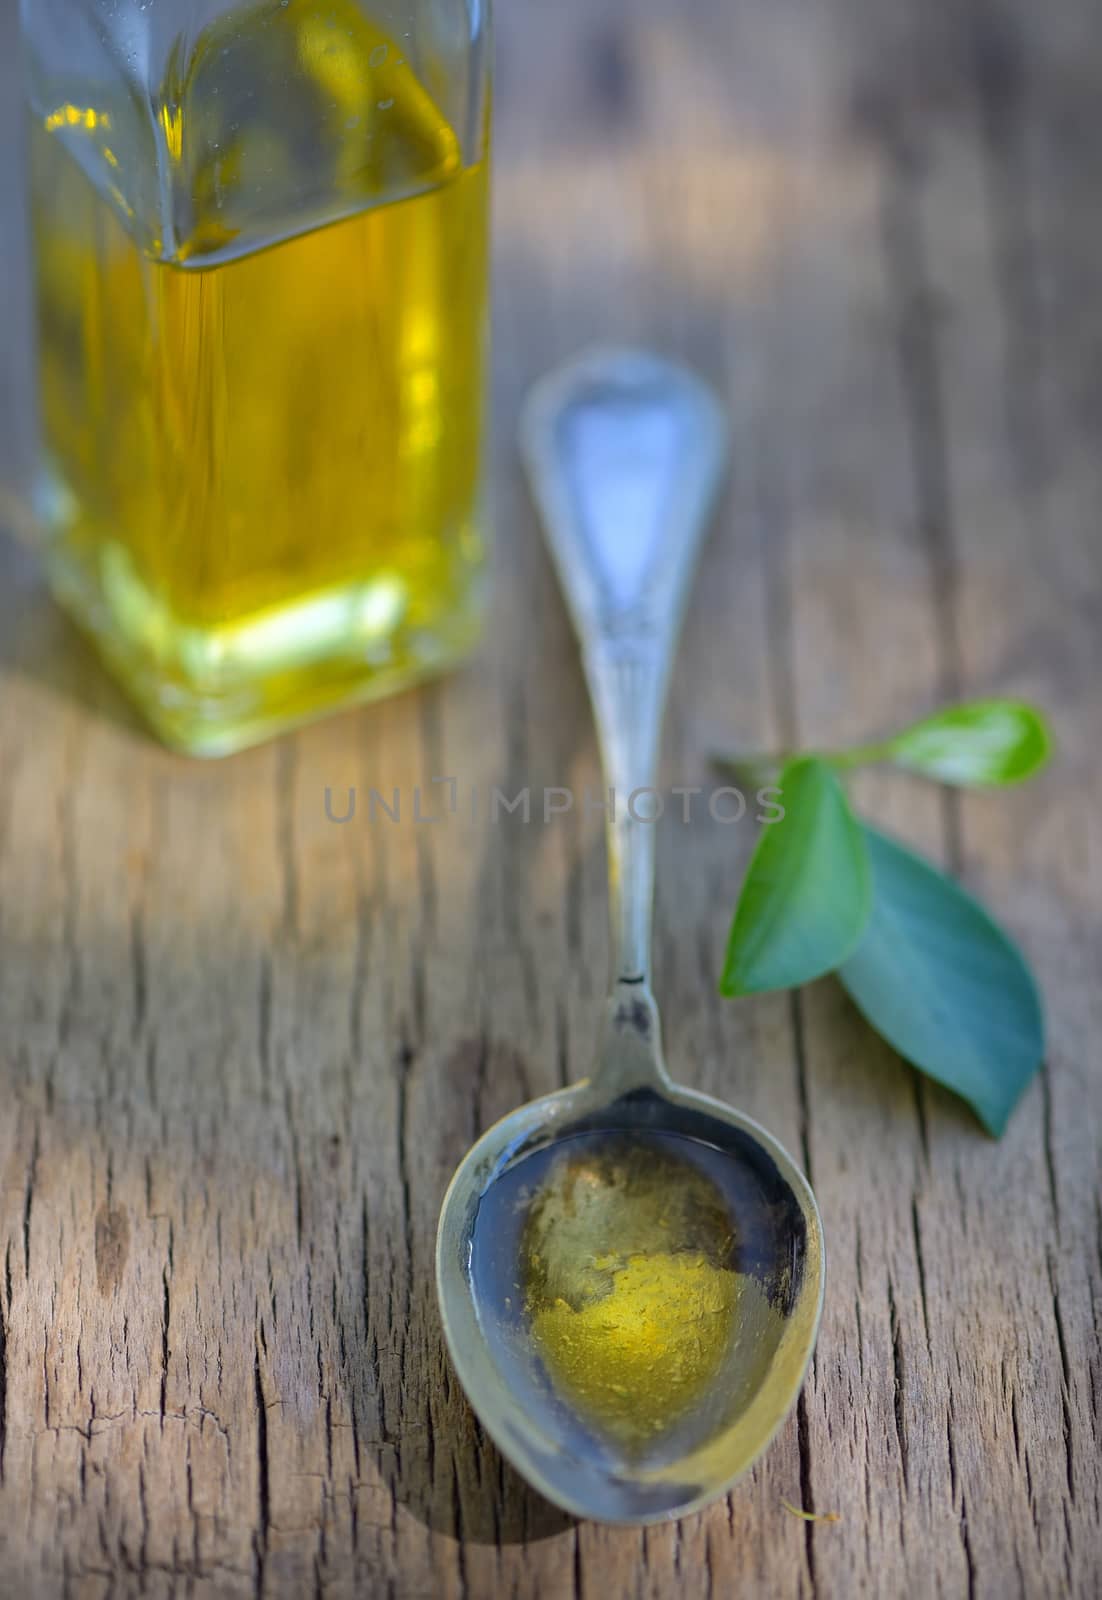 Spoon full of olive oil on wooden table